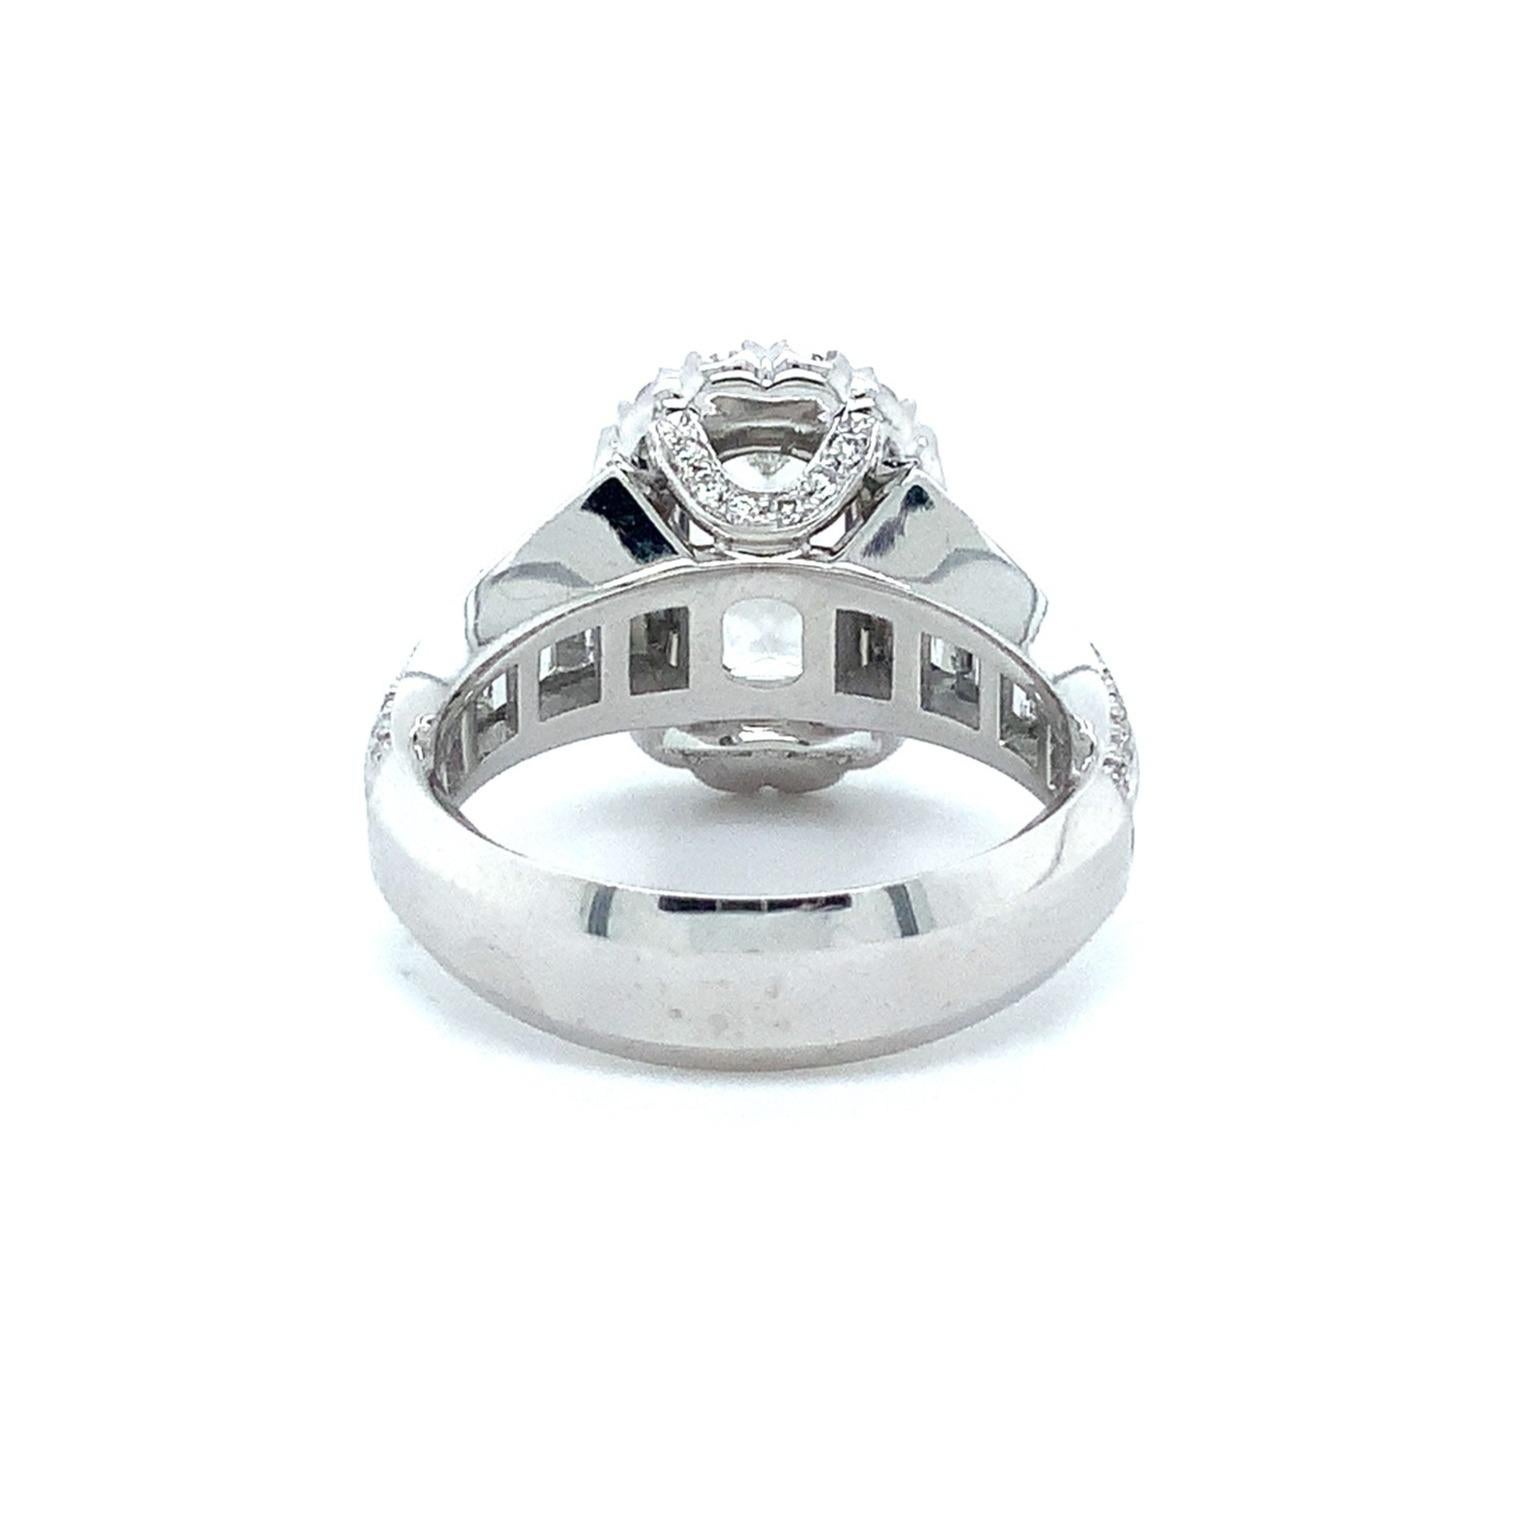 Emerald Cut Christopher Designs Crisscut Engagement Ring with 3.10 cts Set in Platinum For Sale